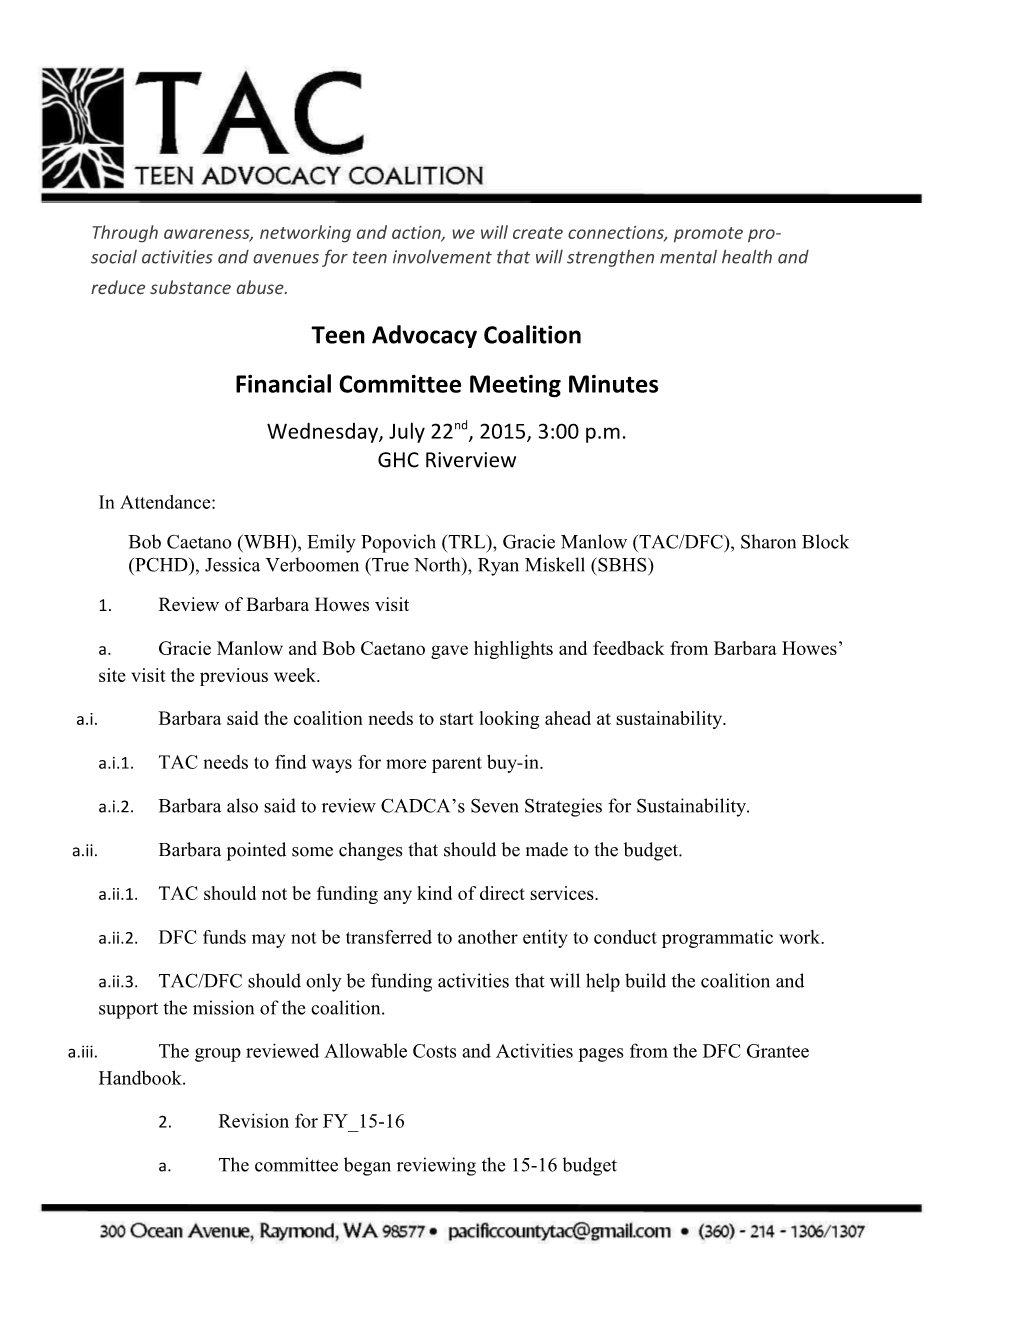 TAC Financial Committee 11-18-14